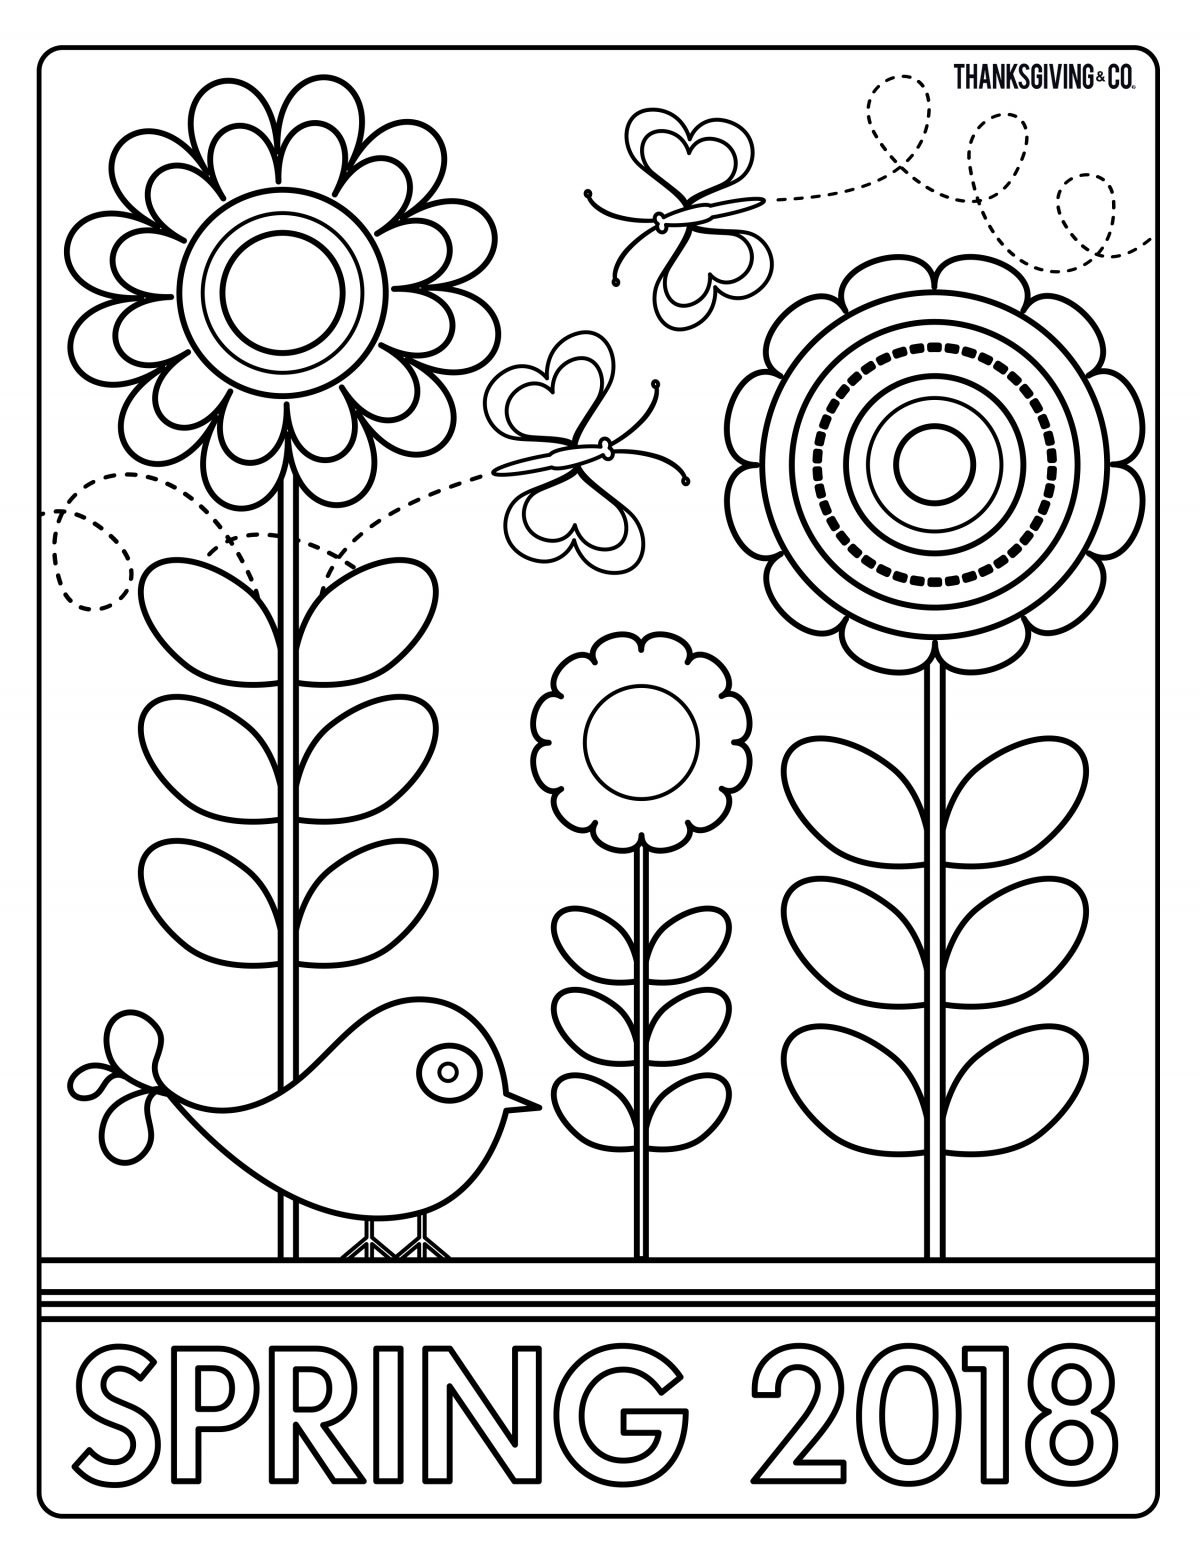 Coloring book page - spring flowers